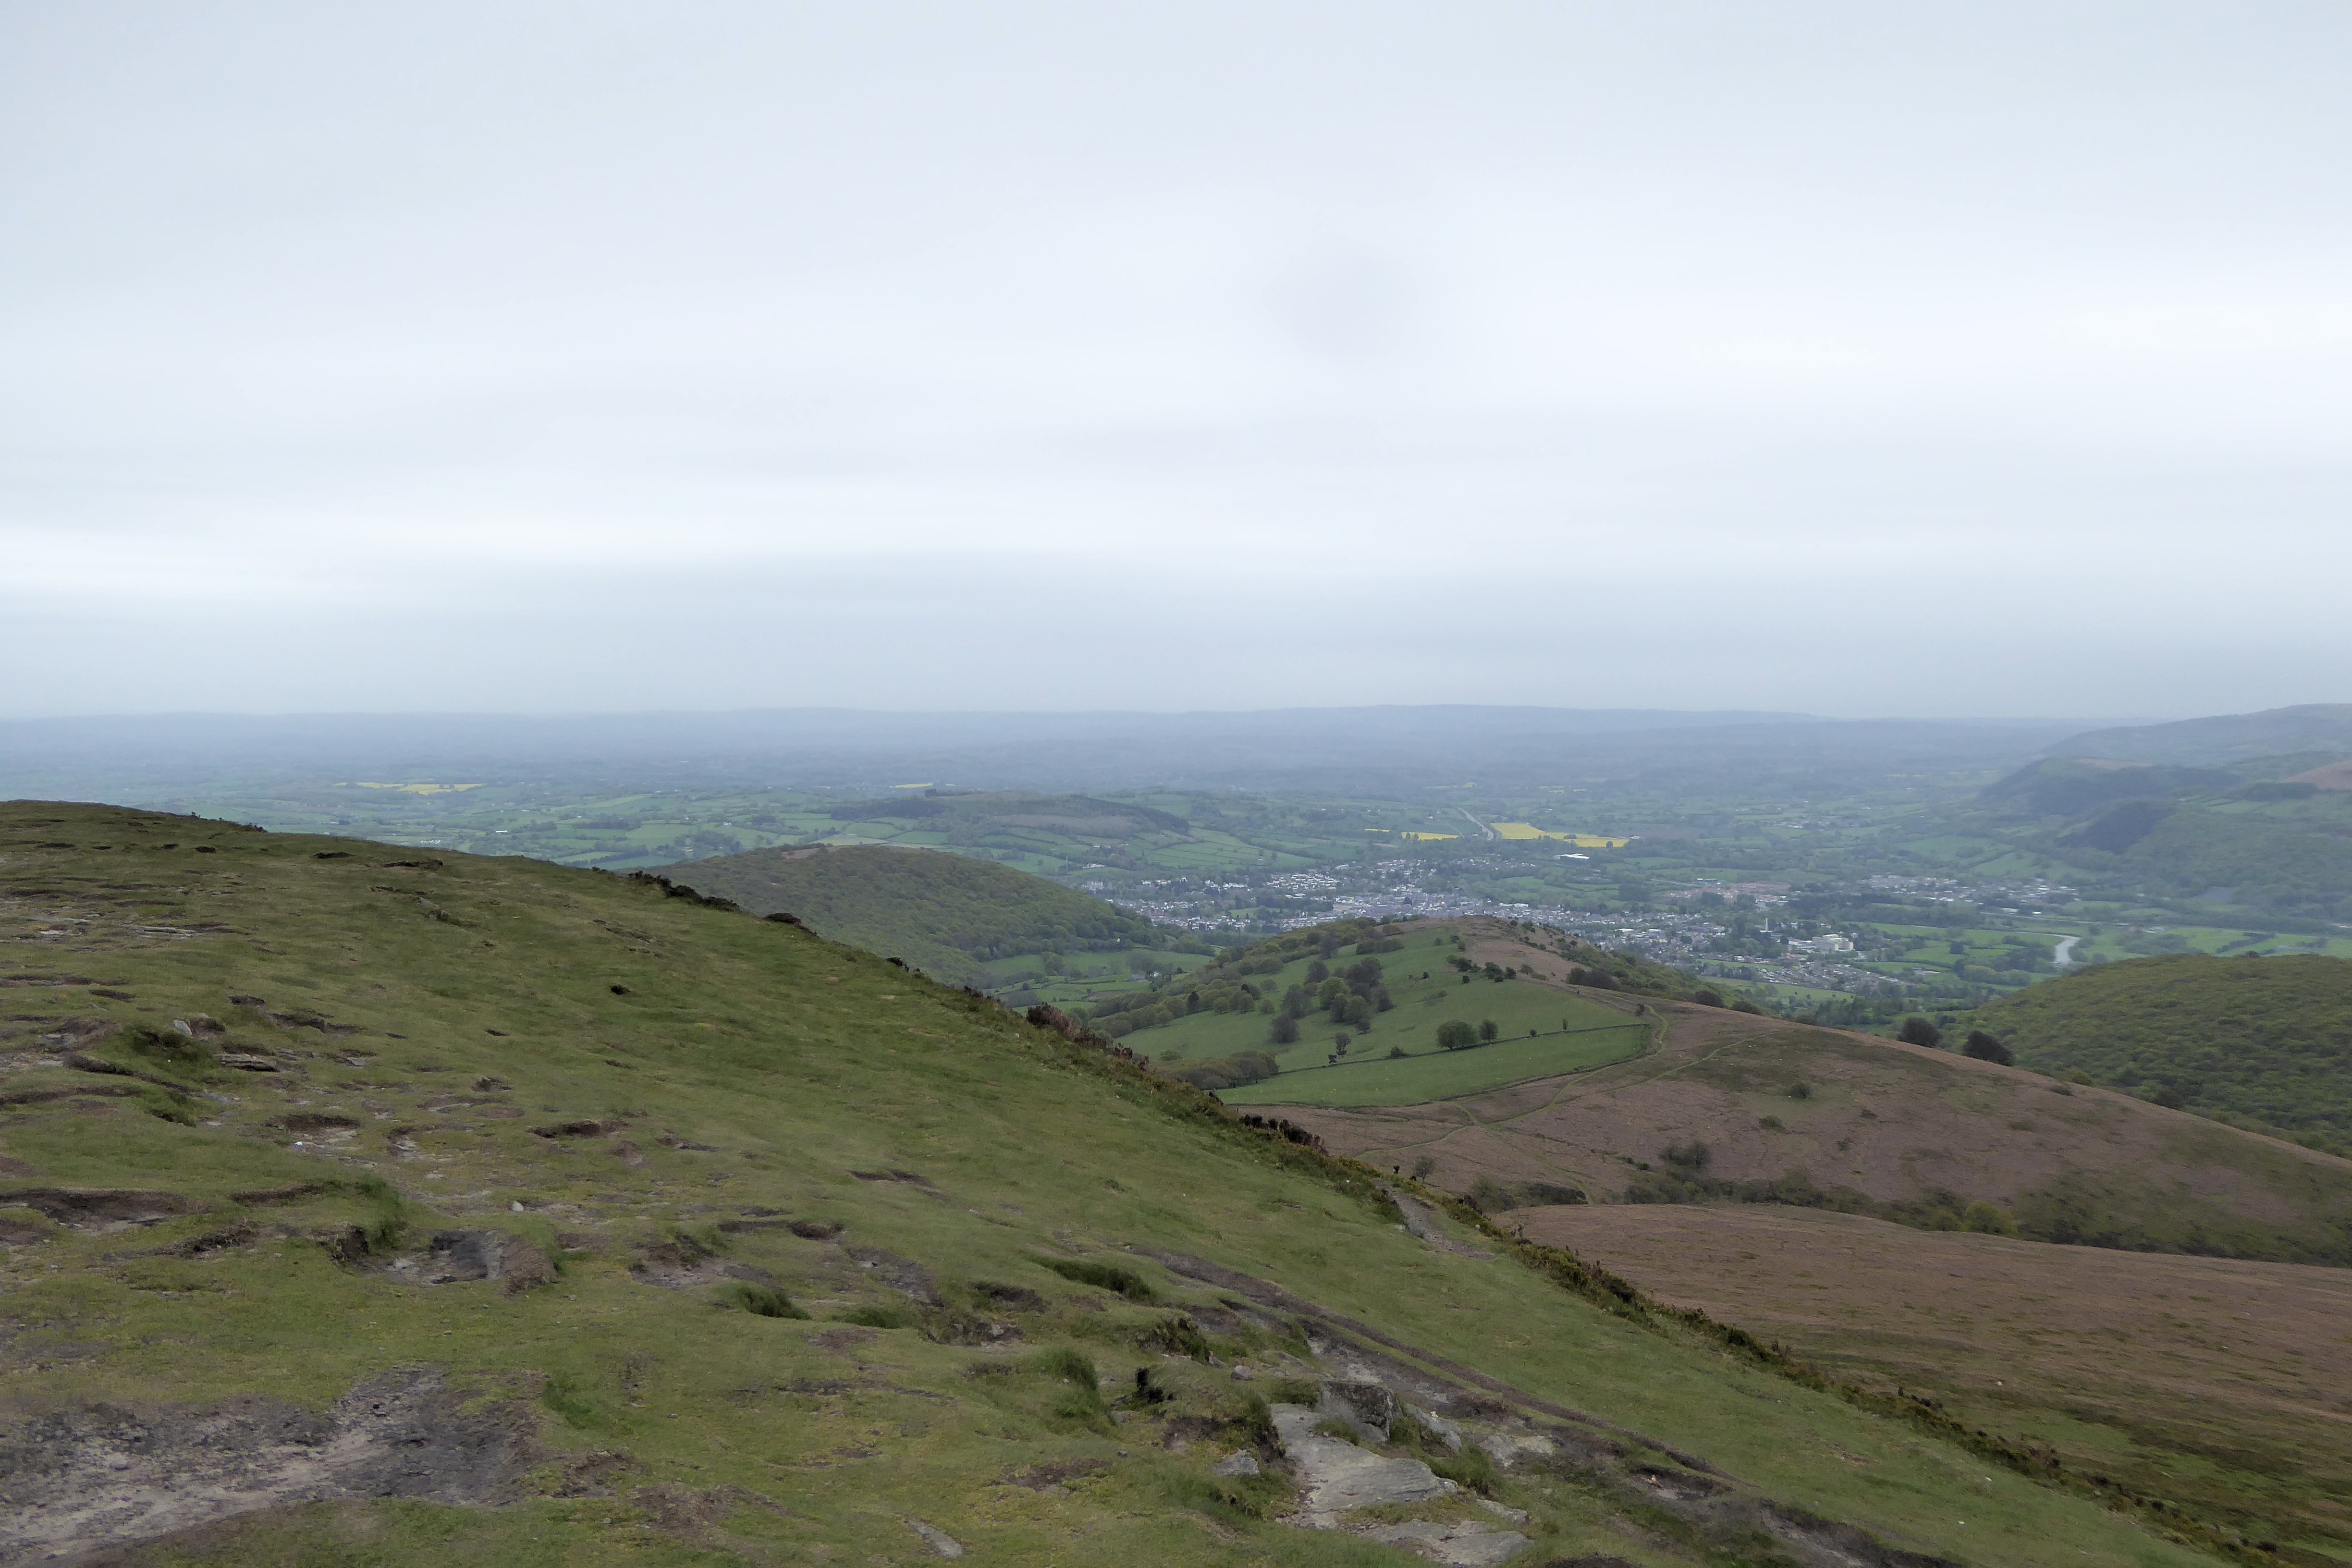 Sugarloaf: View from the top of the Sugarloaf - © Flickr user Andrew Bowden